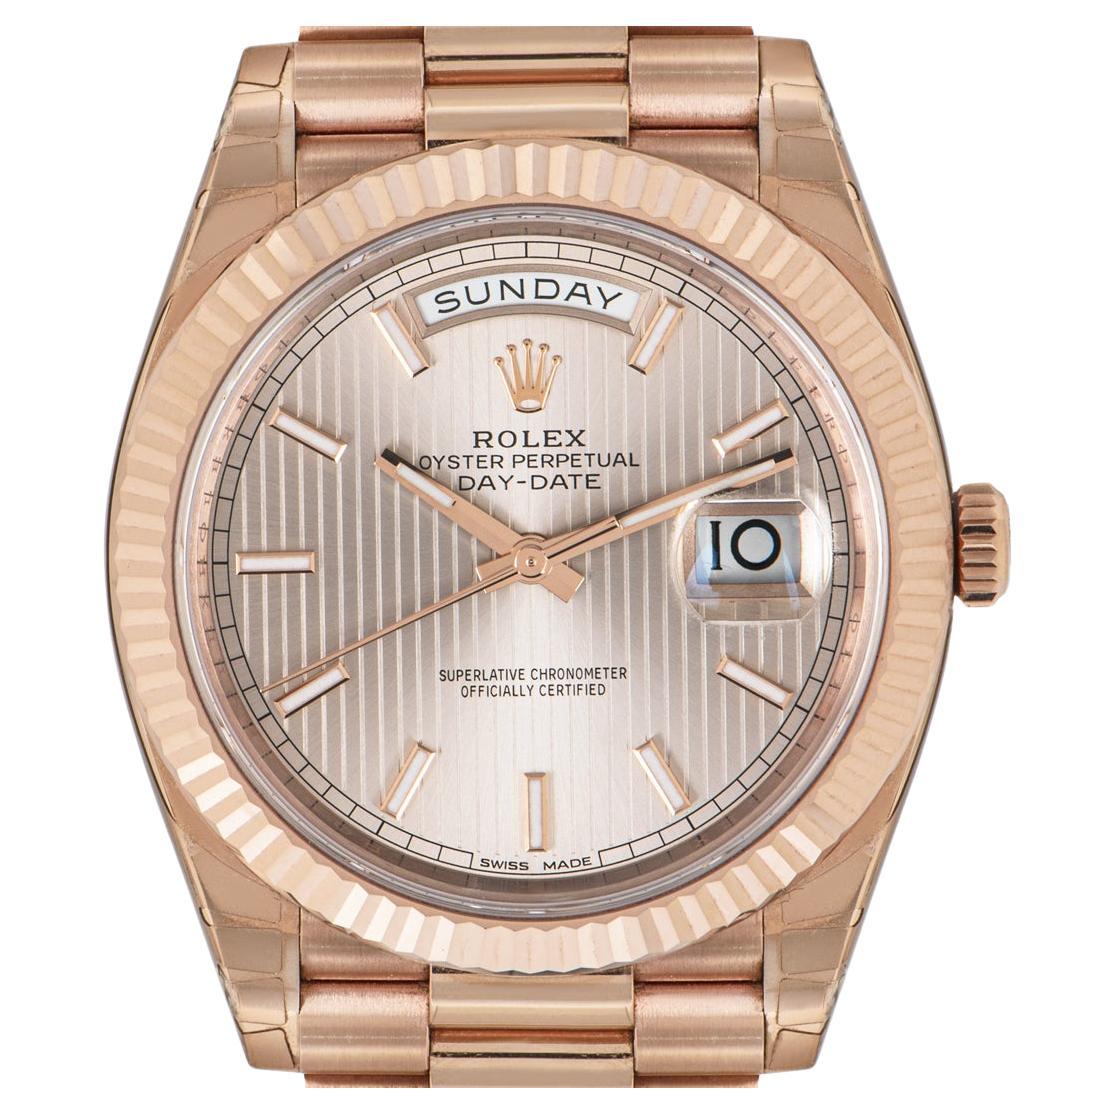 A stunning unworn Day-Date, crafted in 18k rose gold by Rolex. Featuring a sun dust stripe motif dial with applied hour markers. Complementing the dial is a fixed rose gold fluted bezel, unique to the Rolex design.

Equipped with a president